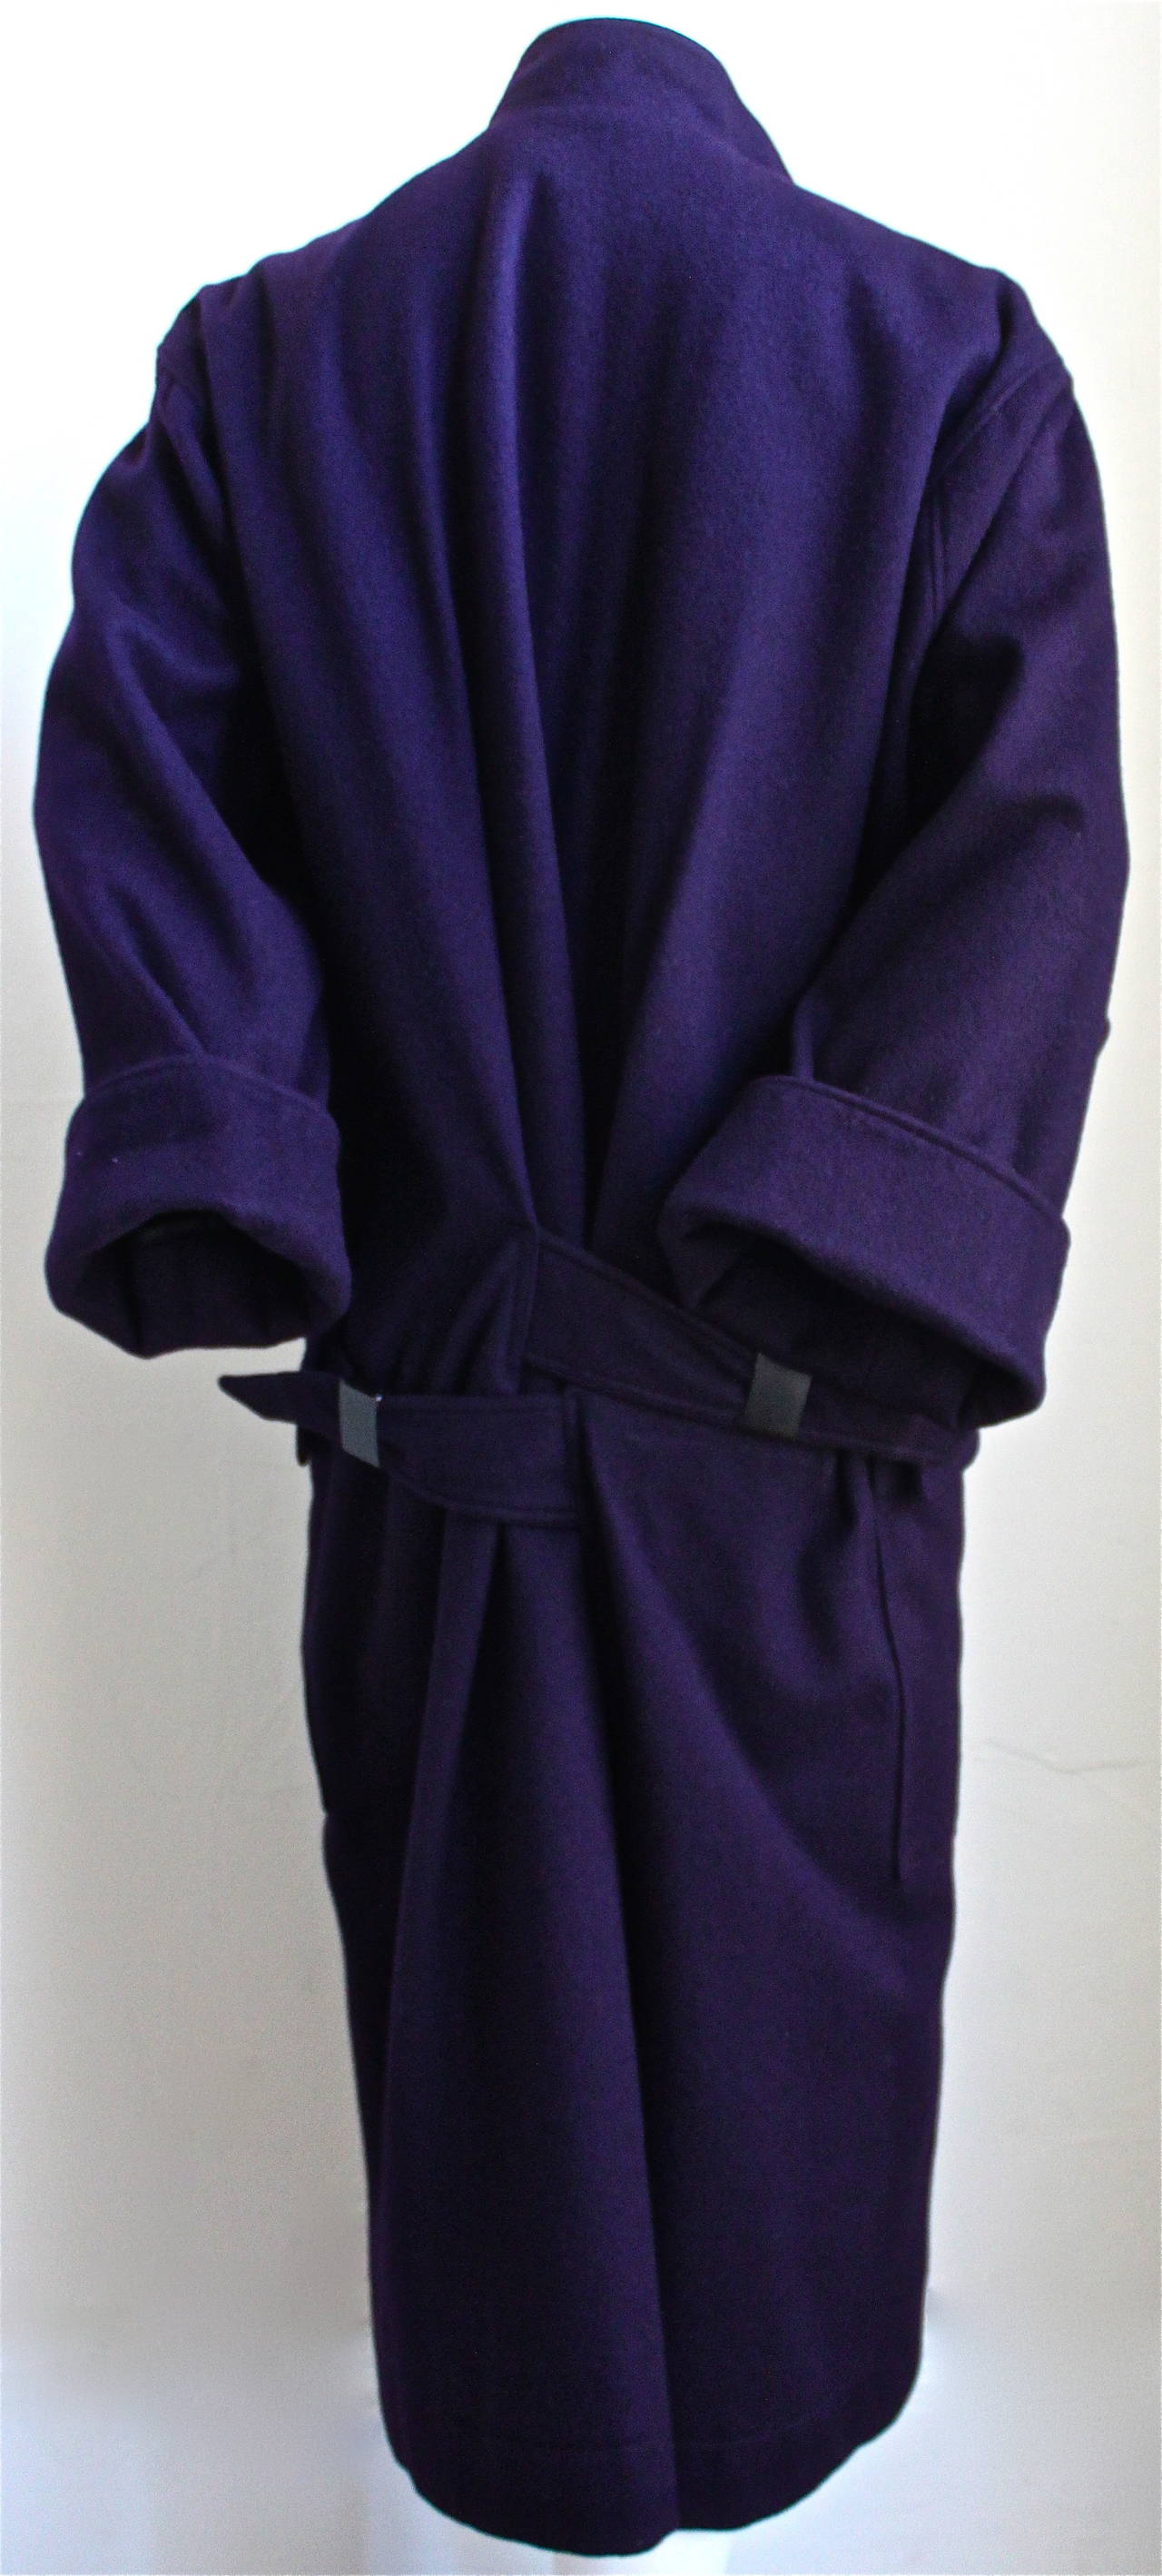 Very rare deep plum wool coat with unique adjustable metal buckles at back from Azzedine Alaia dating to the mid 1980's. No size is indicated however due to the oversized cut this coat can be worn by a size 6 up to a size 10. Approximate